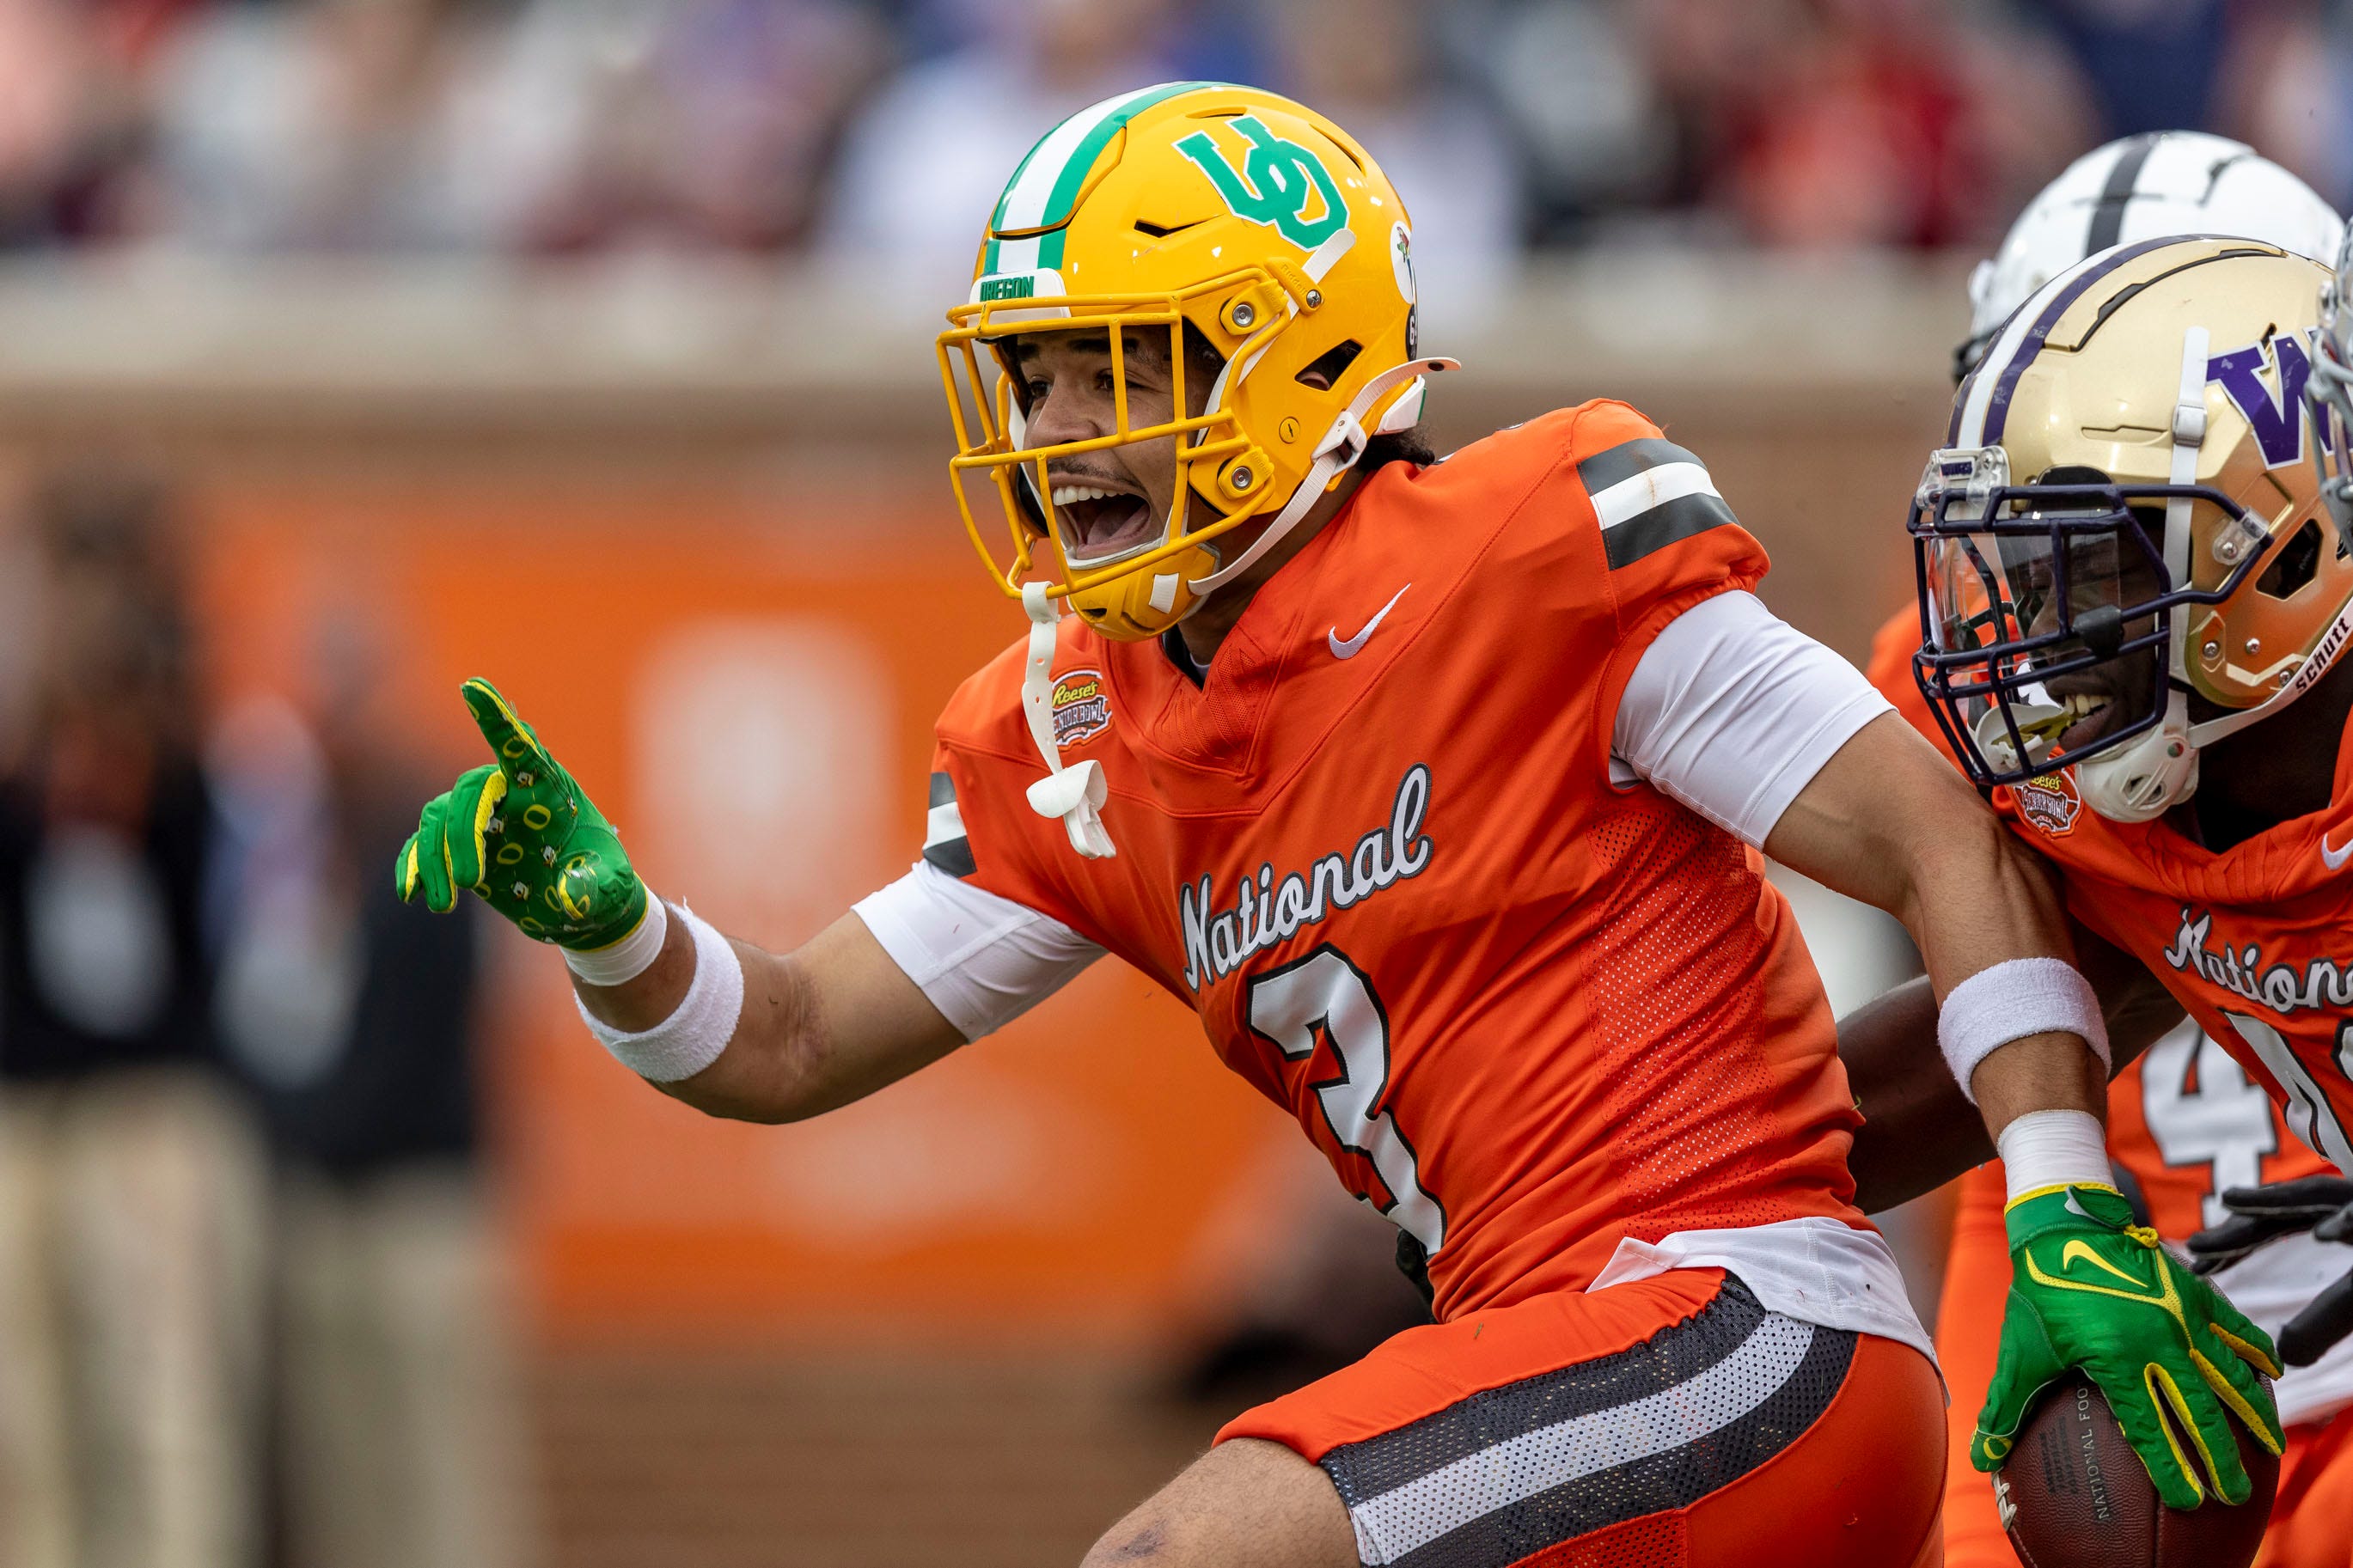 instant analysis of packers taking oregon s evan williams at no. 111 overall